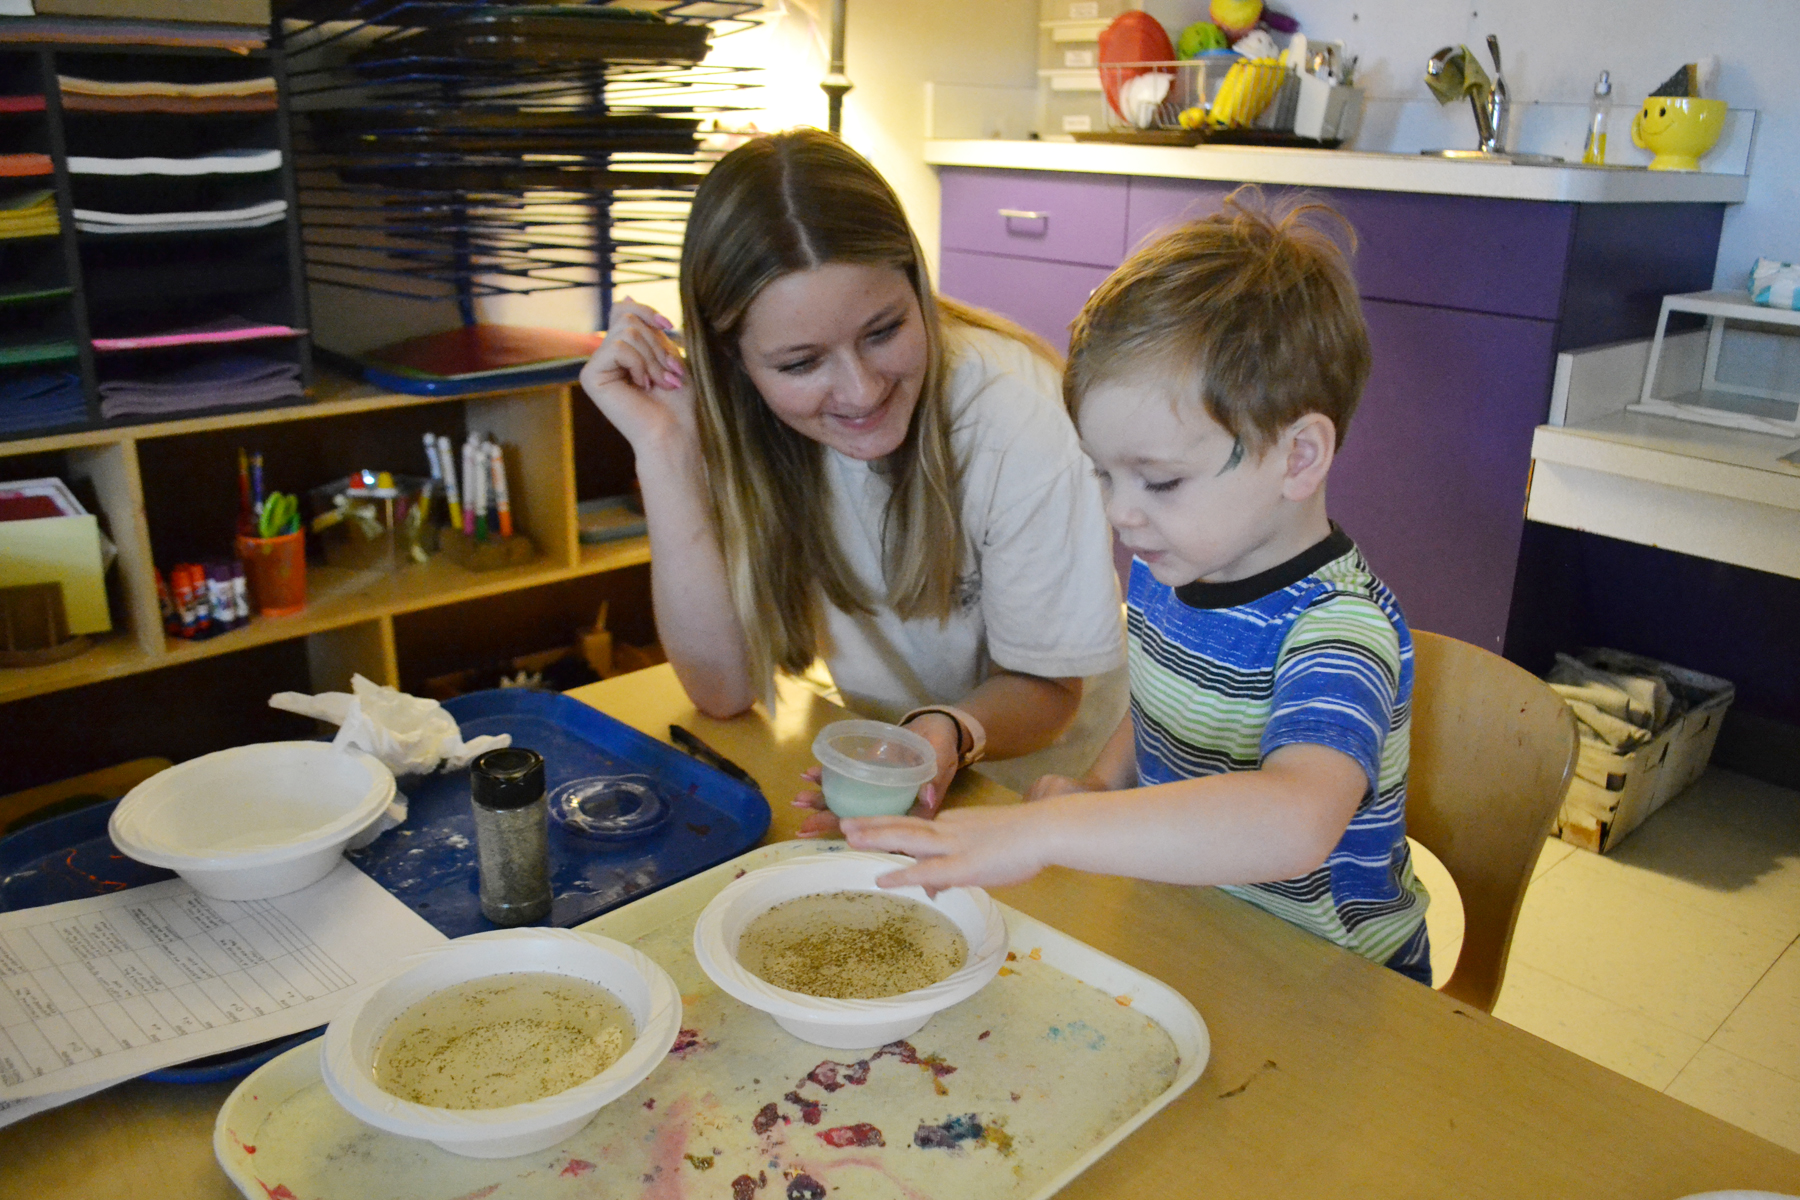 College student and child doing art activity at table in preschool